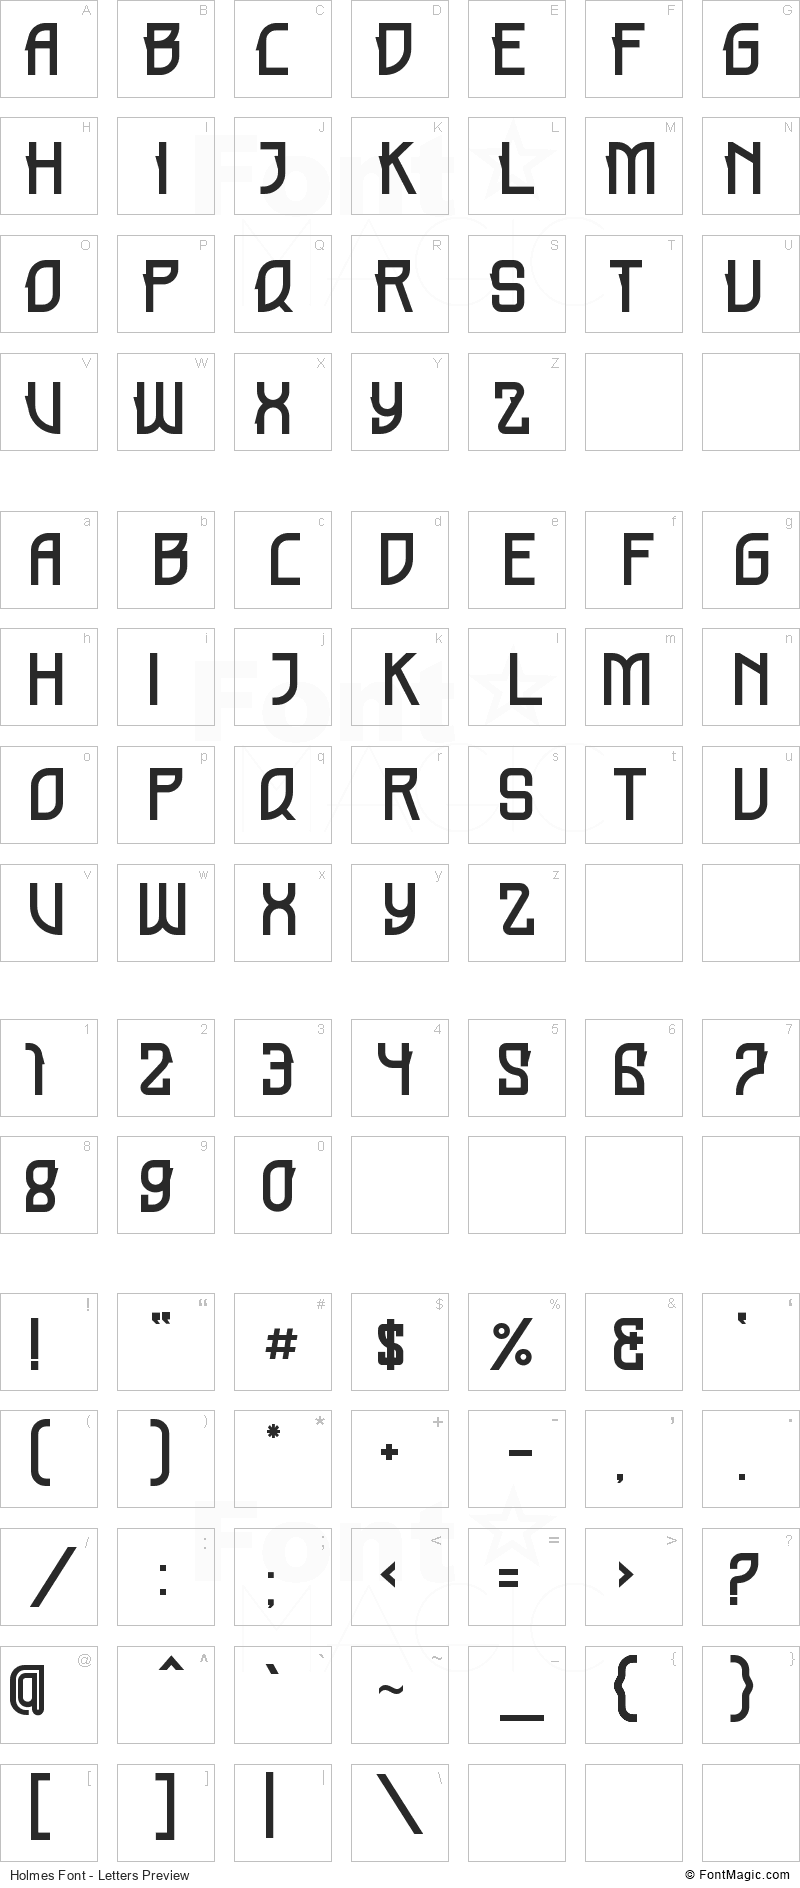 Holmes Font - All Latters Preview Chart